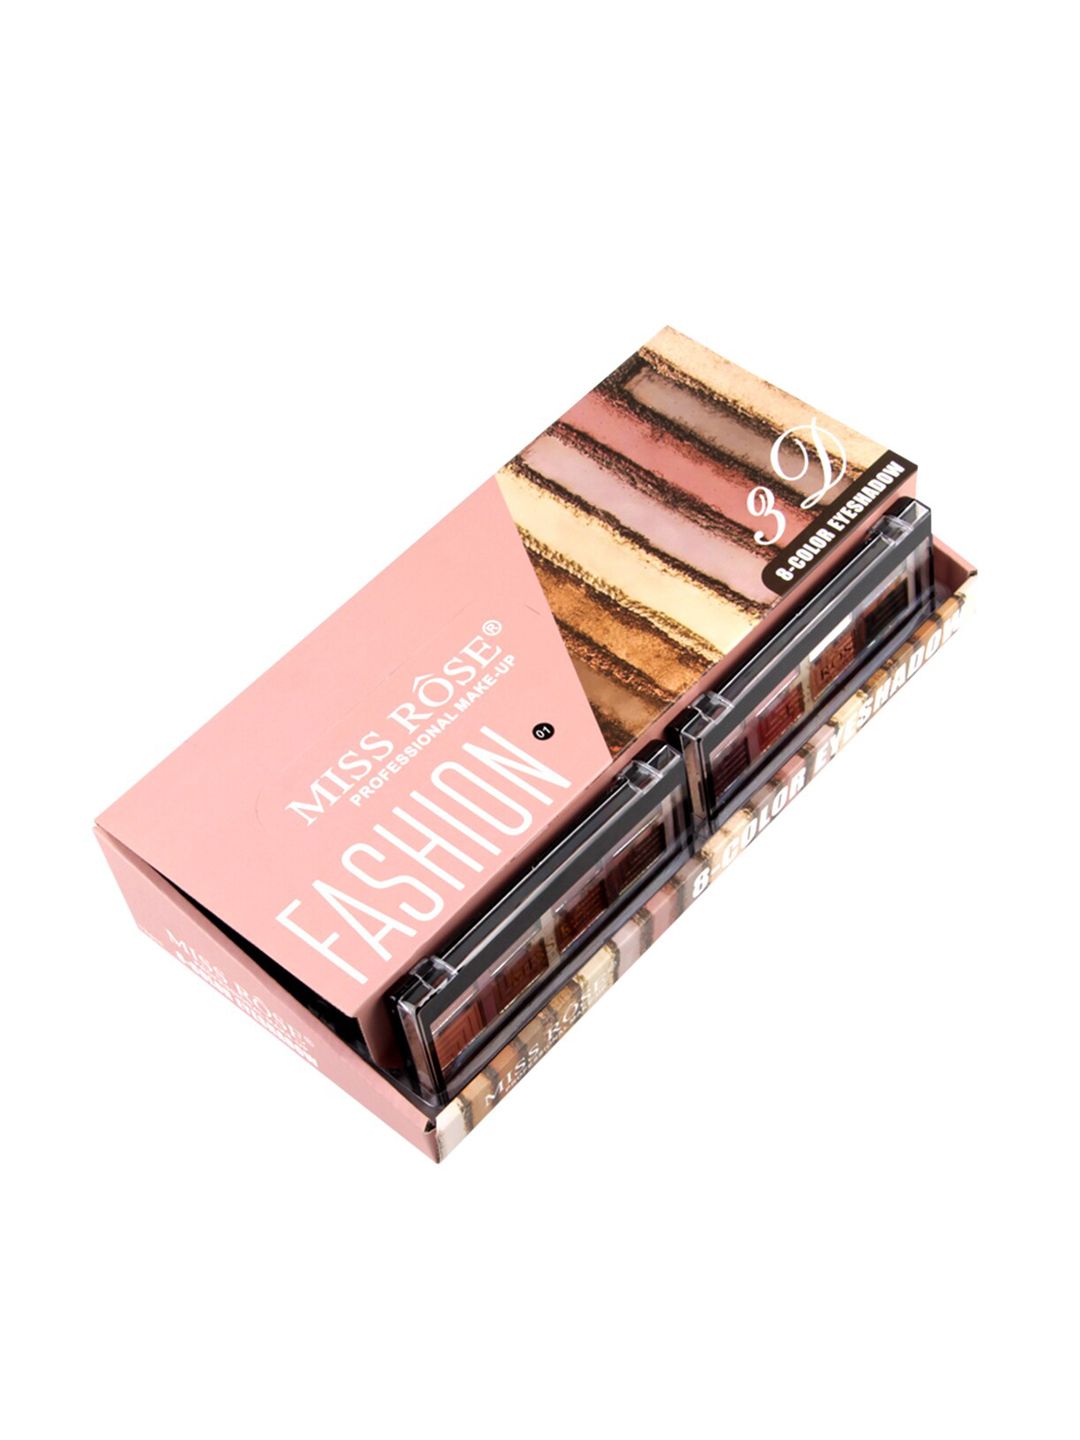 MISS ROSE 8 Color Nude Eyeshadow Palette - 7001-004Z1 02 Price in India